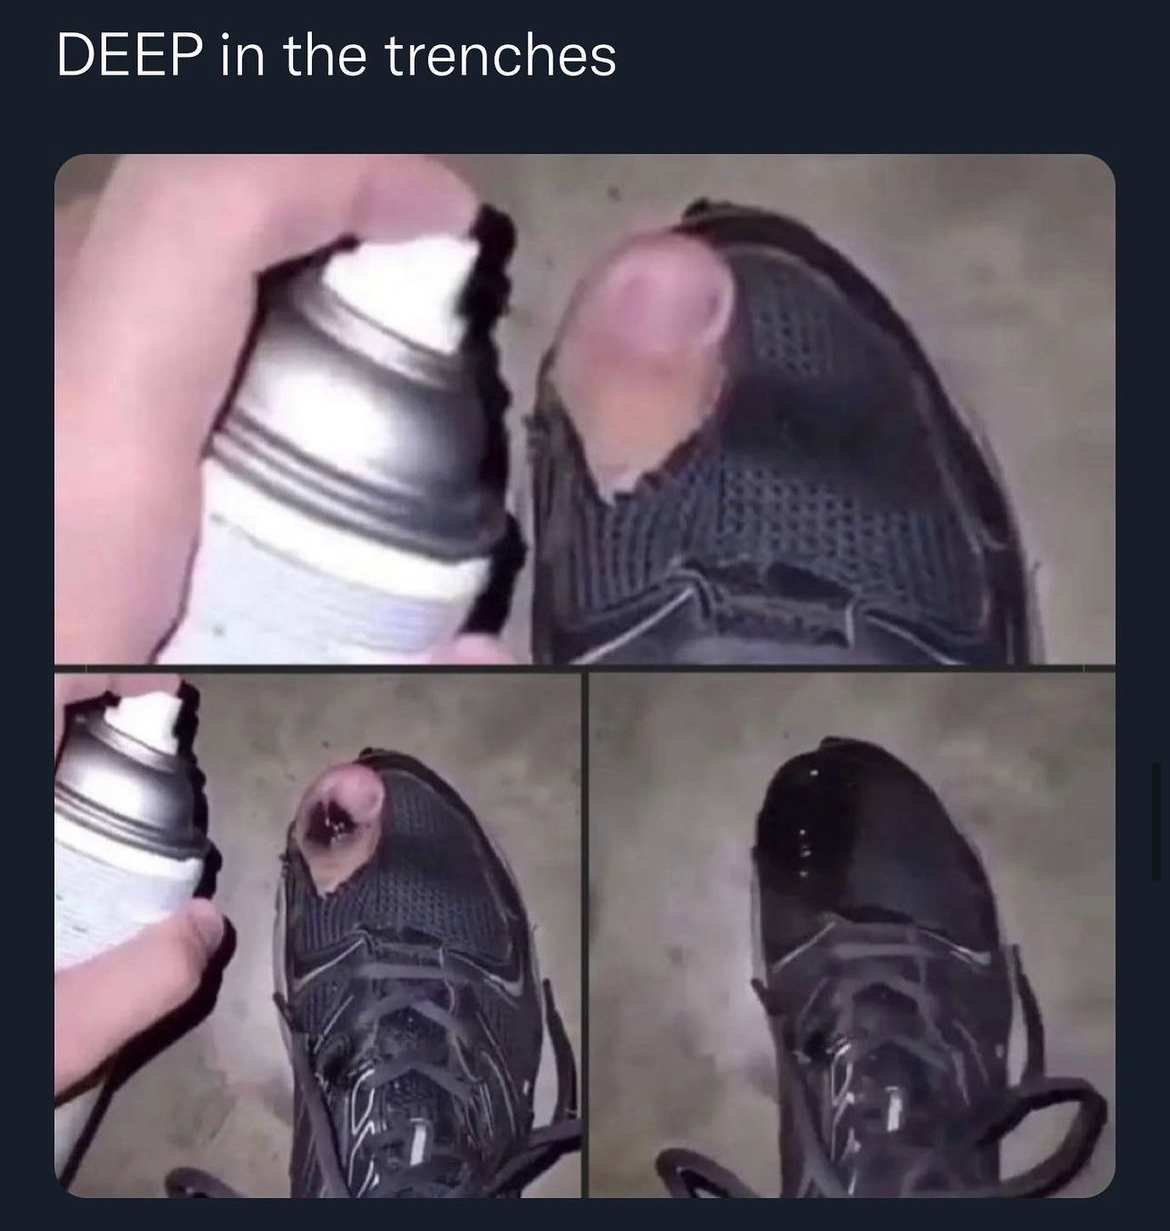 Hoodville memes and captions - cursed shoes - Deep in the trenches